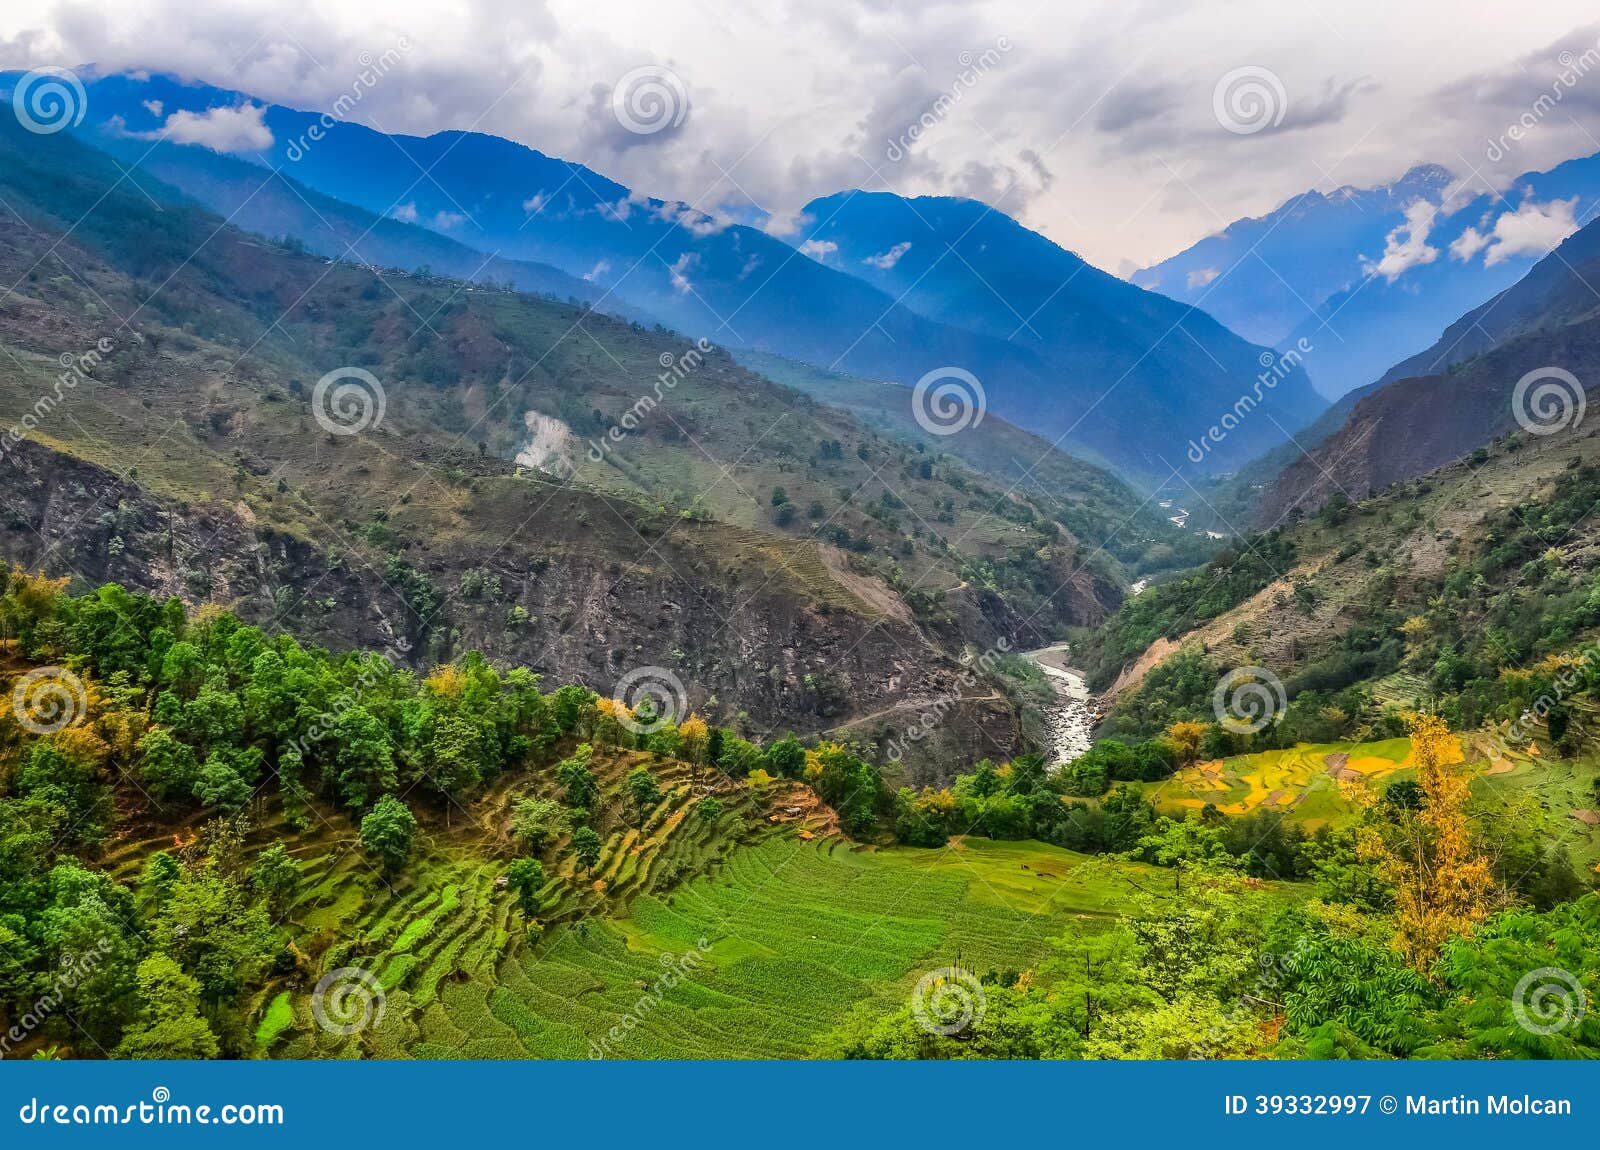 tropical mountain landscape with fields in nepal